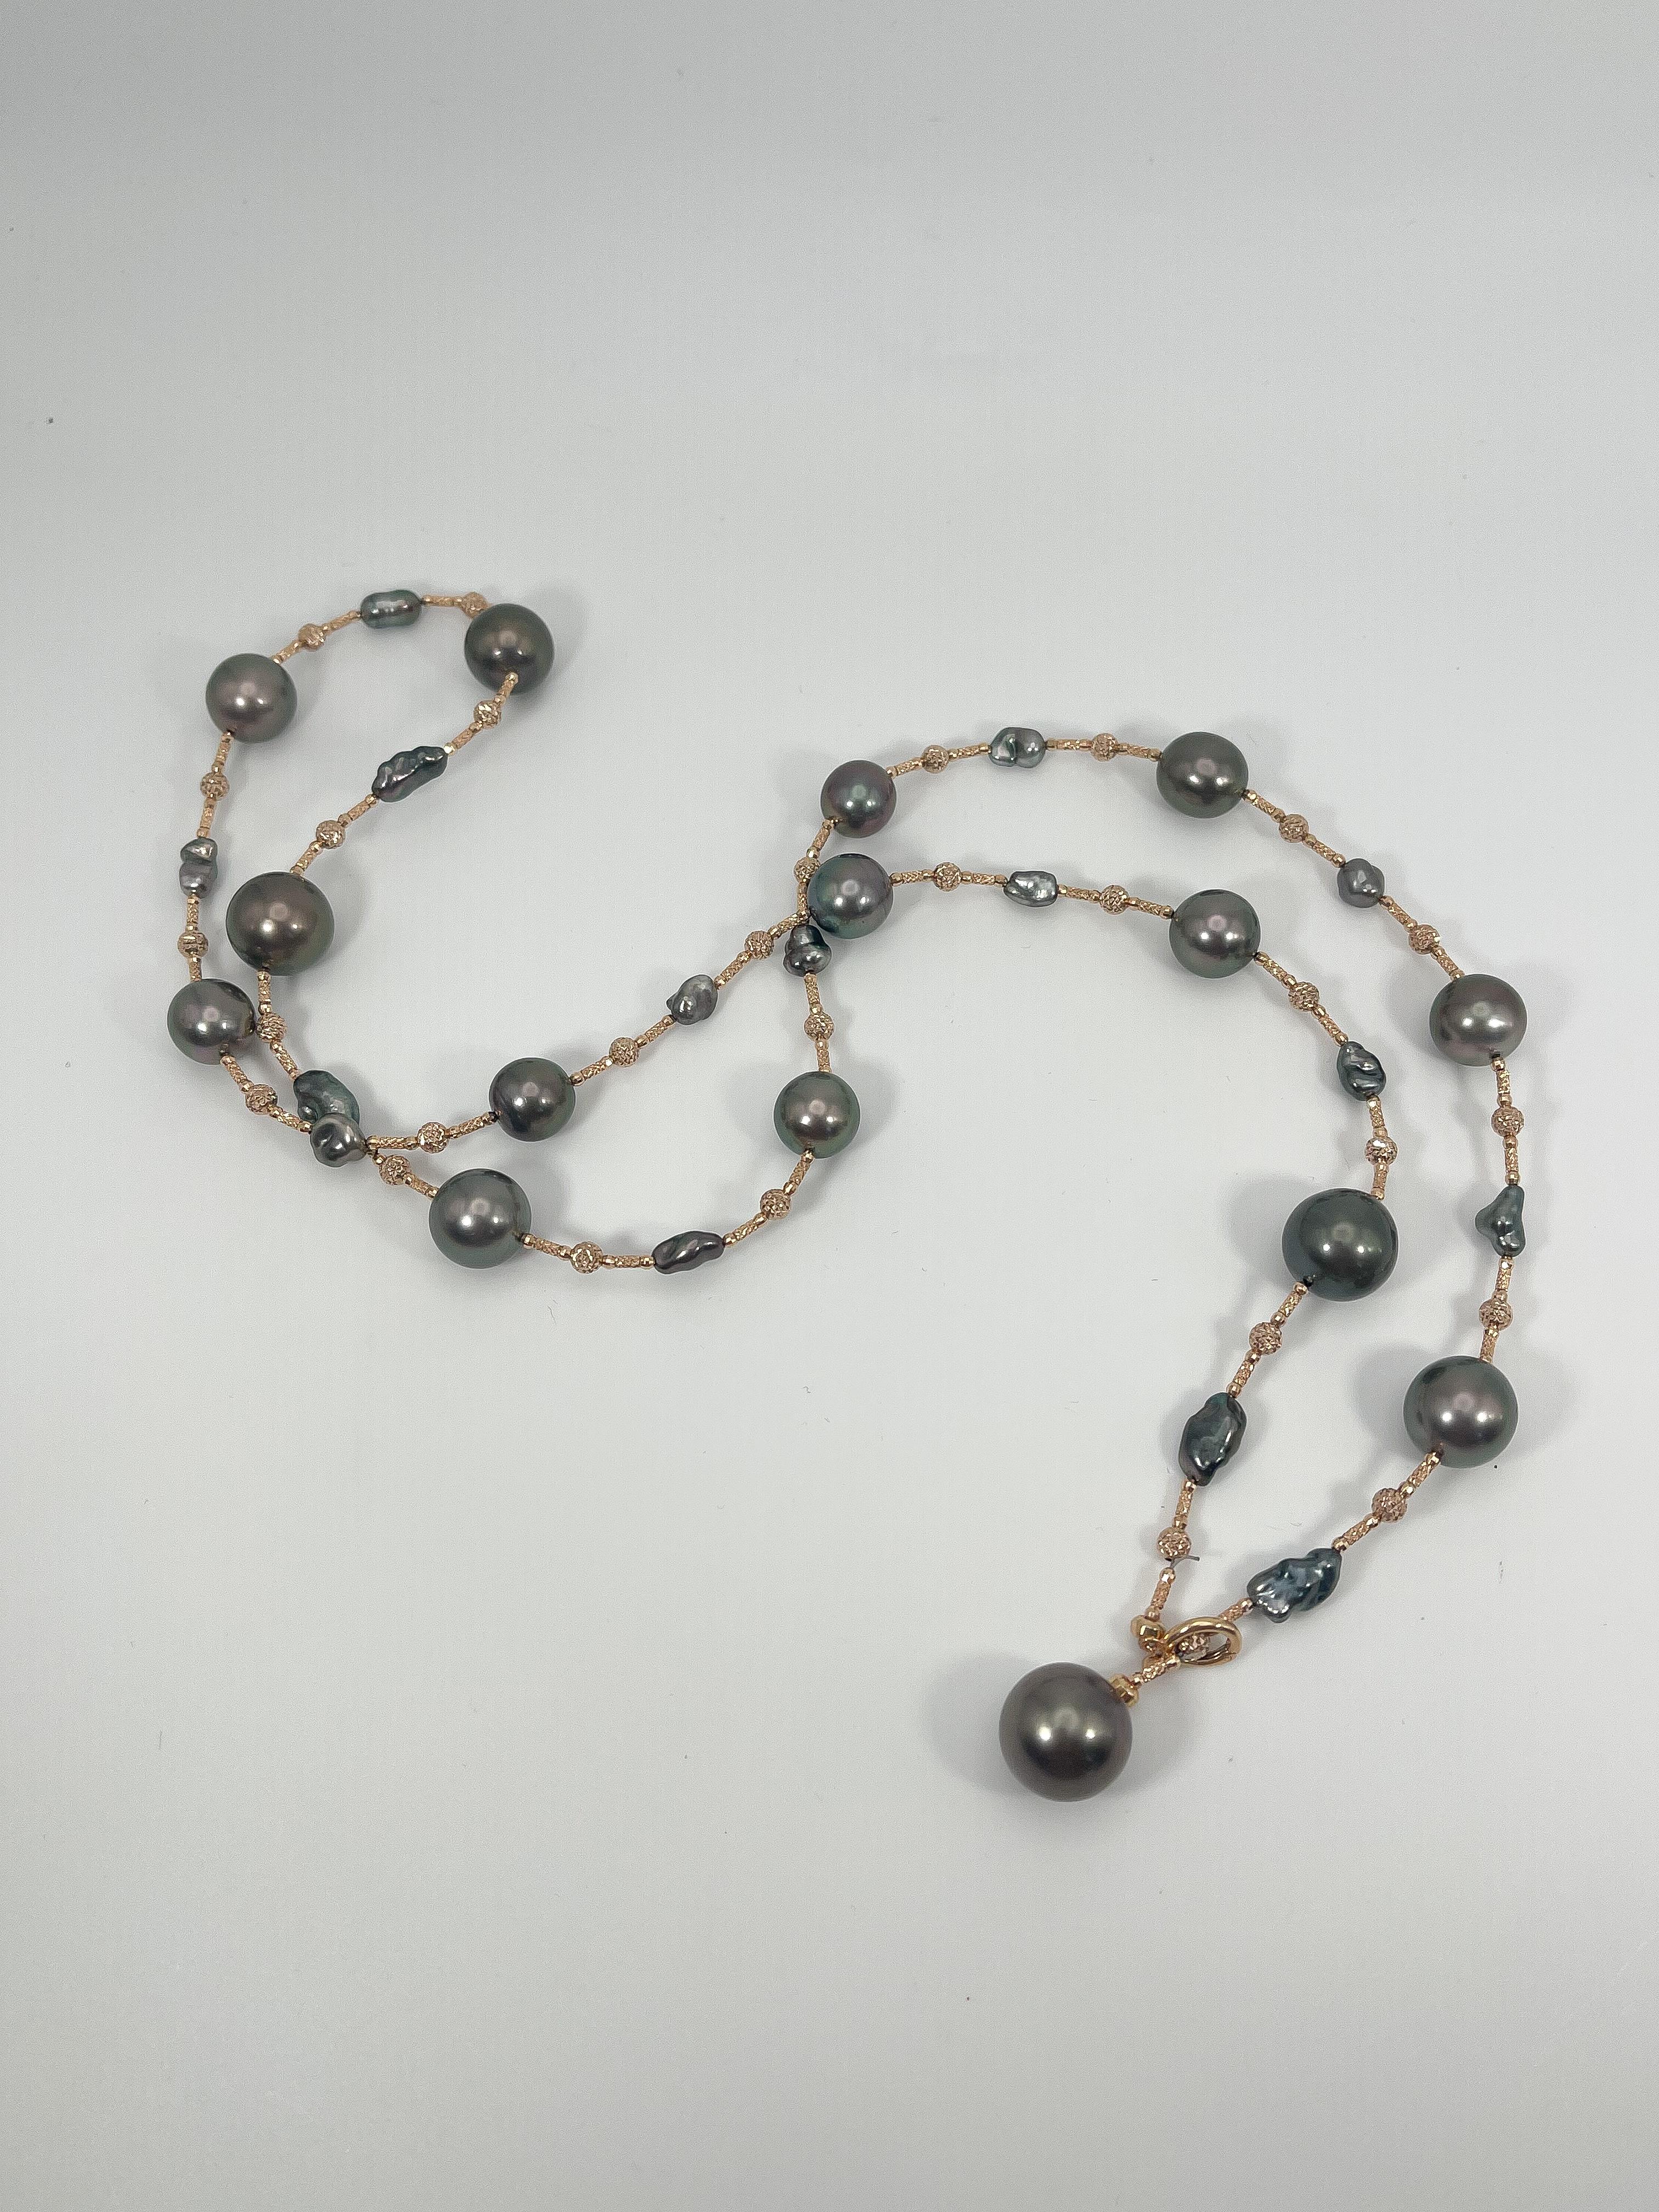 18K Rose gold south sea Tahitian pearl necklace. The pearls are 11mm, has a pearl clasp to close necklace, the necklace is 32 inches long, can be worn in 7 different ways, has a total weight of 53.3 grams.